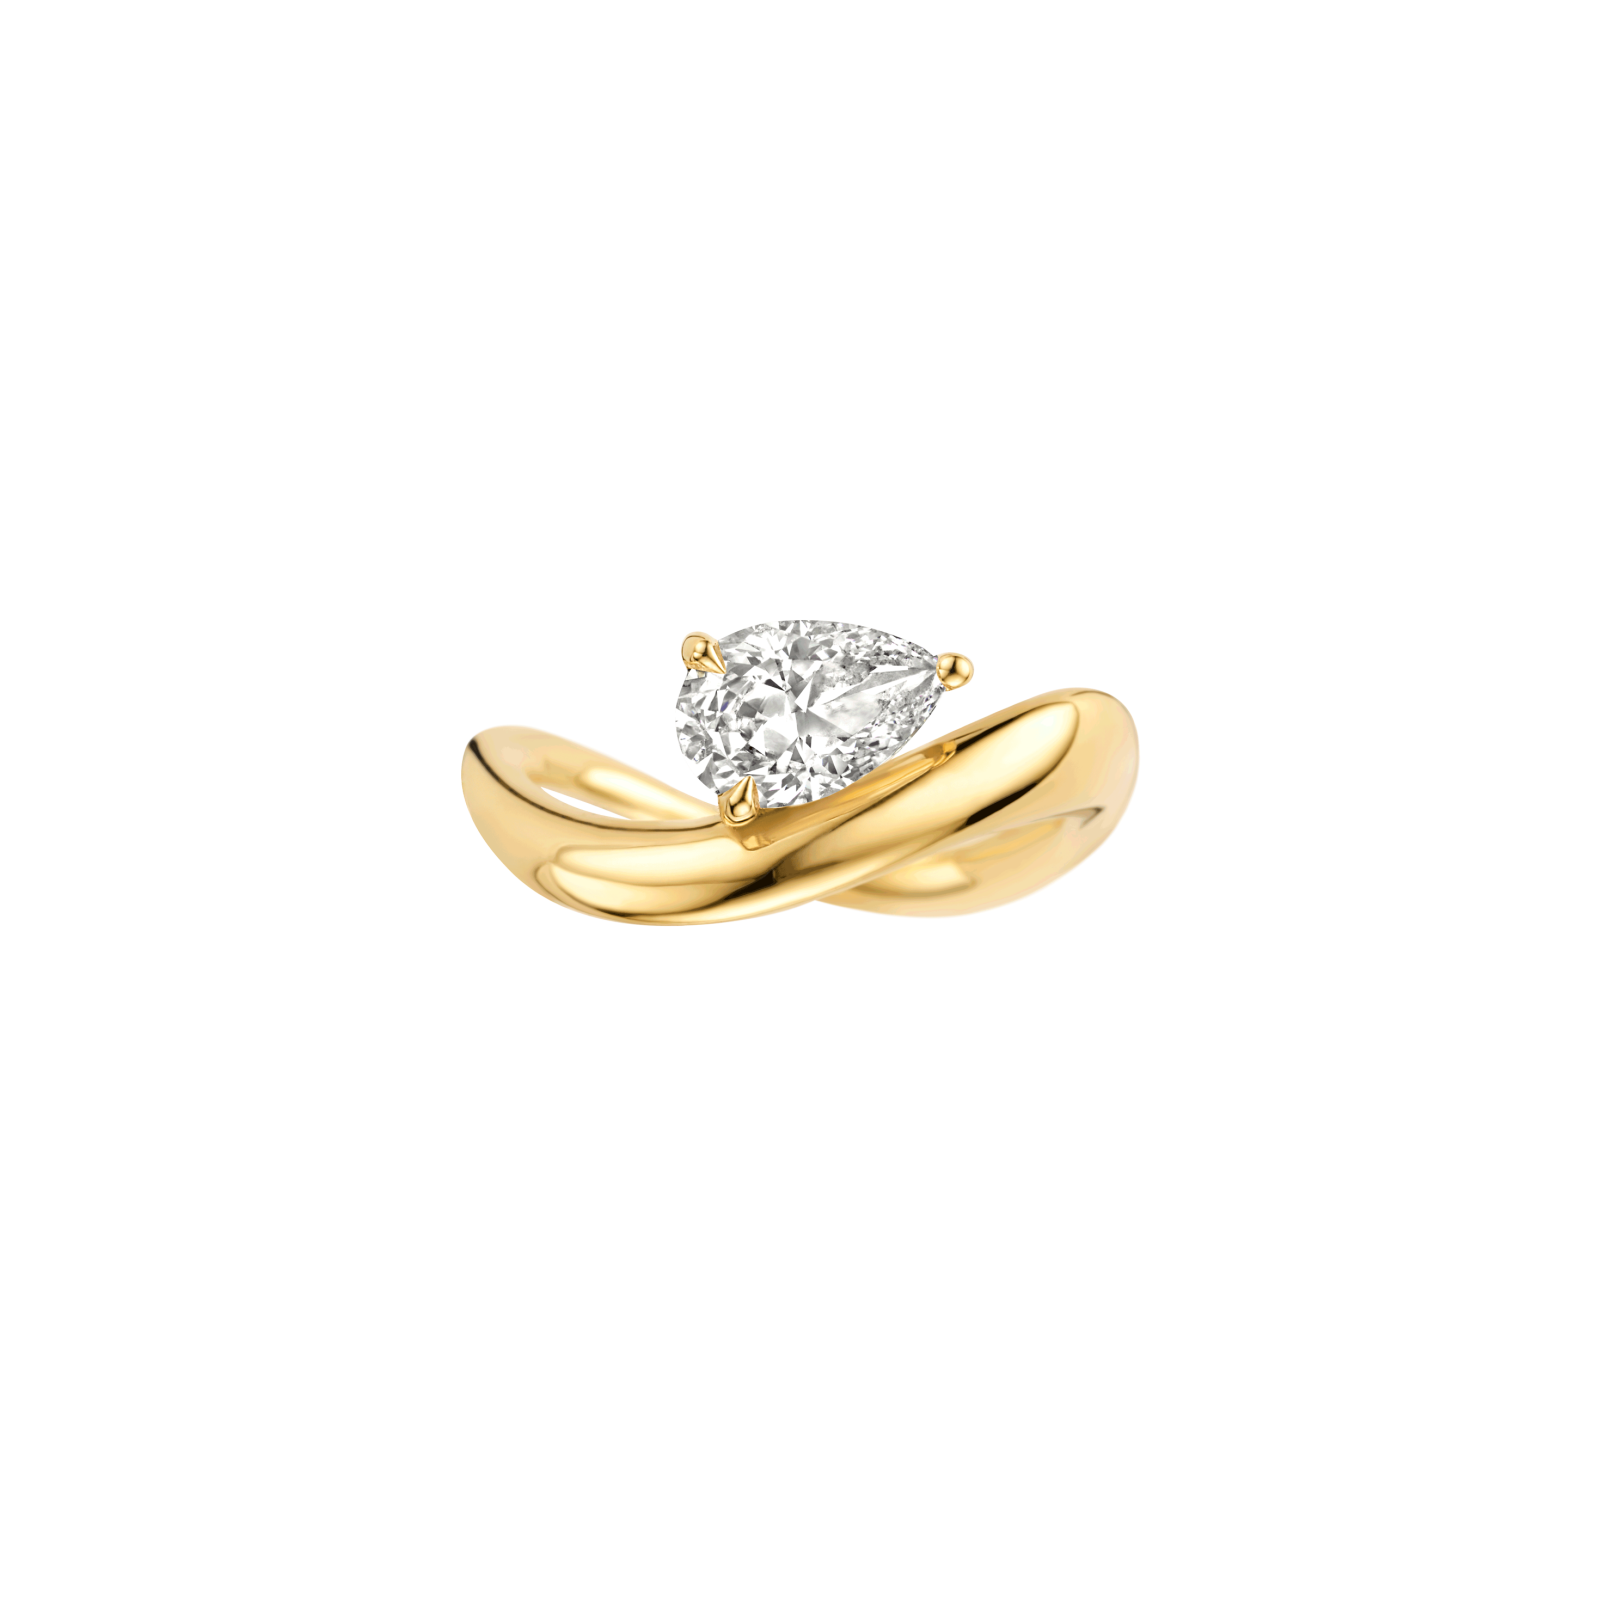 Engagement Ring PNG HD Image